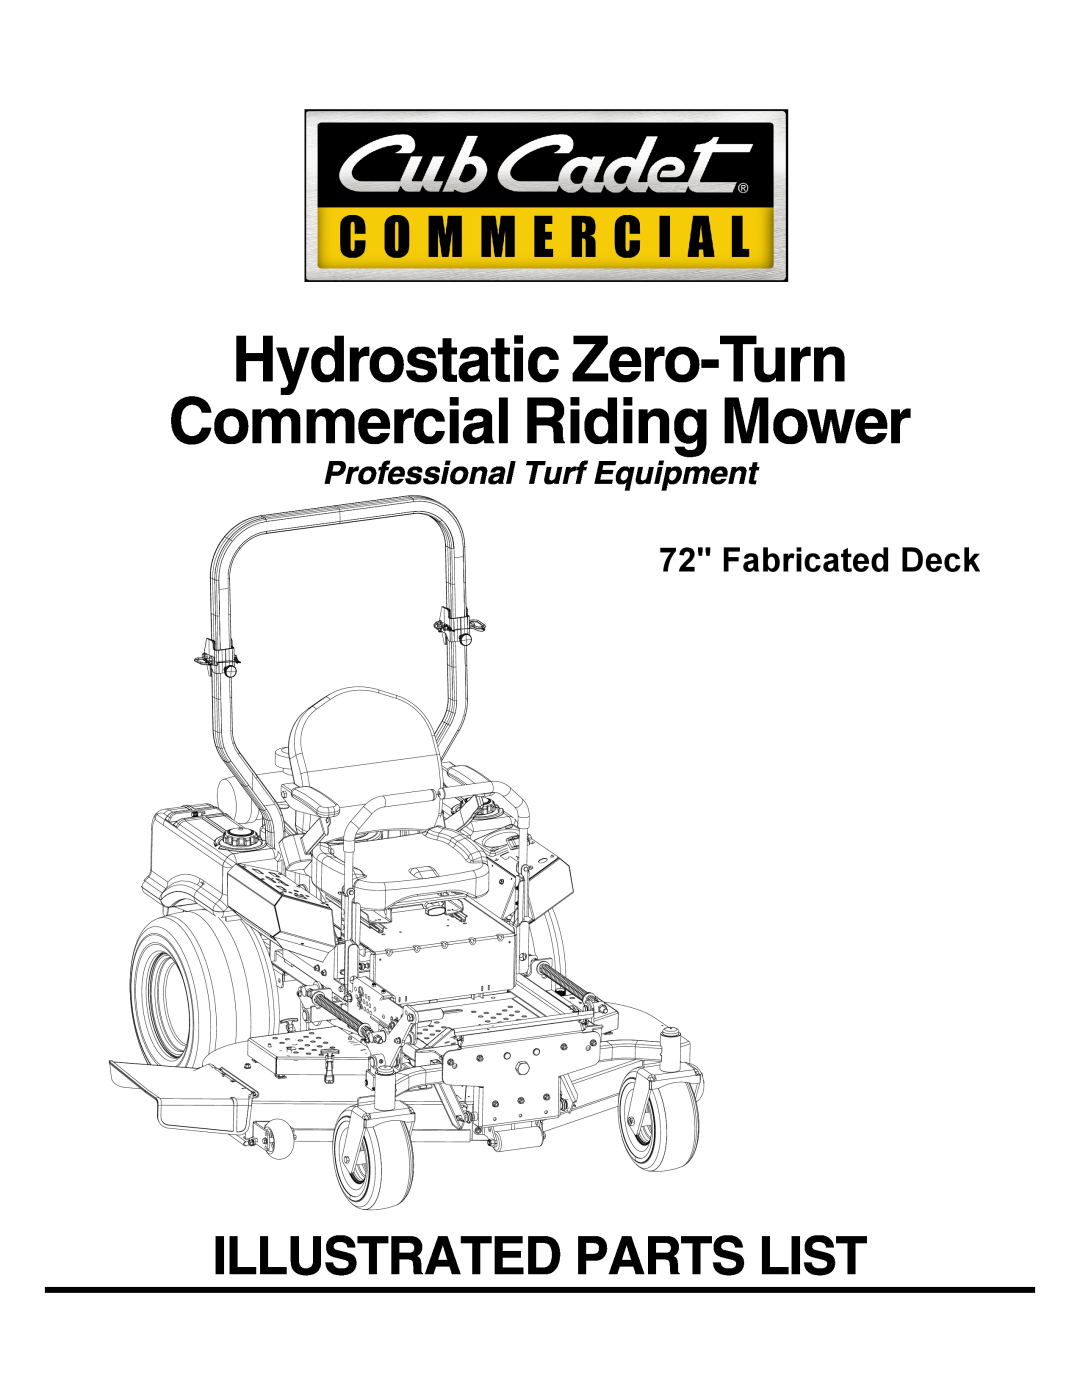 Cub Cadet 53AI8CT8050 manual Hydrostatic Zero-Turn Commercial Riding Mower, Illustrated Parts List, Fabricated Deck 